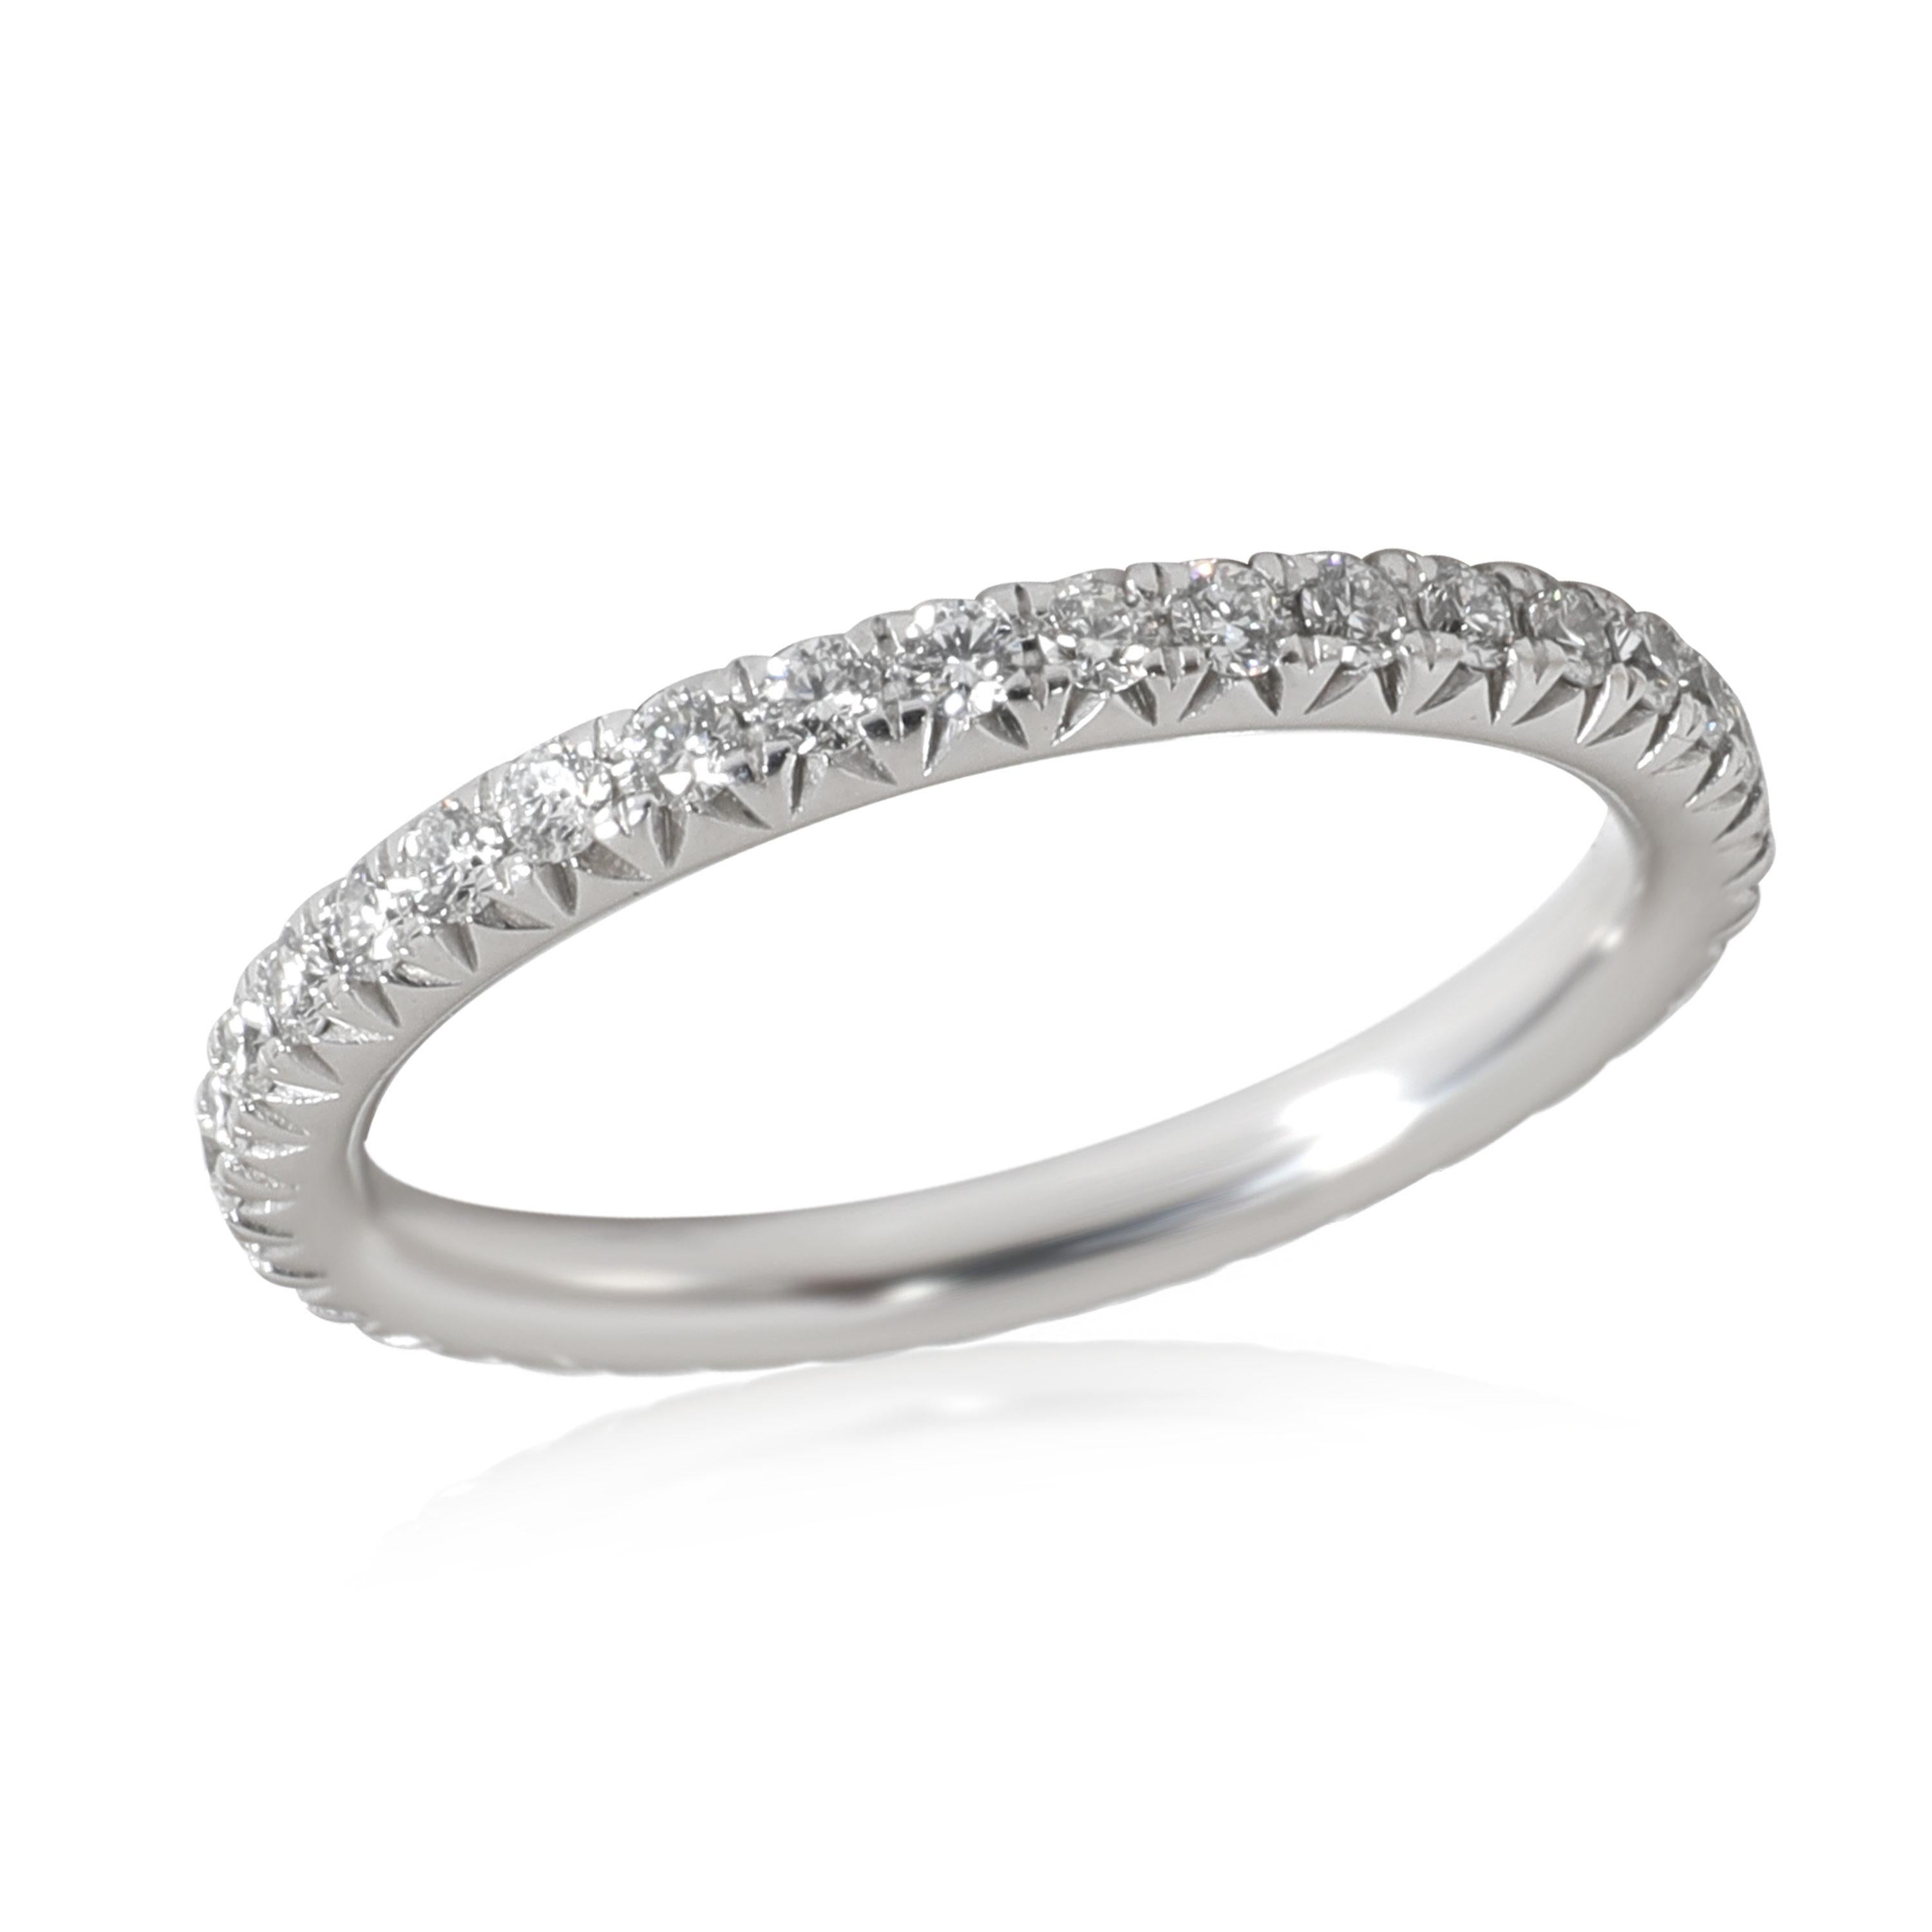 James Allen Diamond Eternity Band in Platinum 0.49 CTW

PRIMARY DETAILS
SKU: 116464
Listing Title: James Allen Diamond Eternity Band in Platinum 0.49 CTW
Condition Description: Retails for 2600 USD. In excellent condition and recently polished. Ring